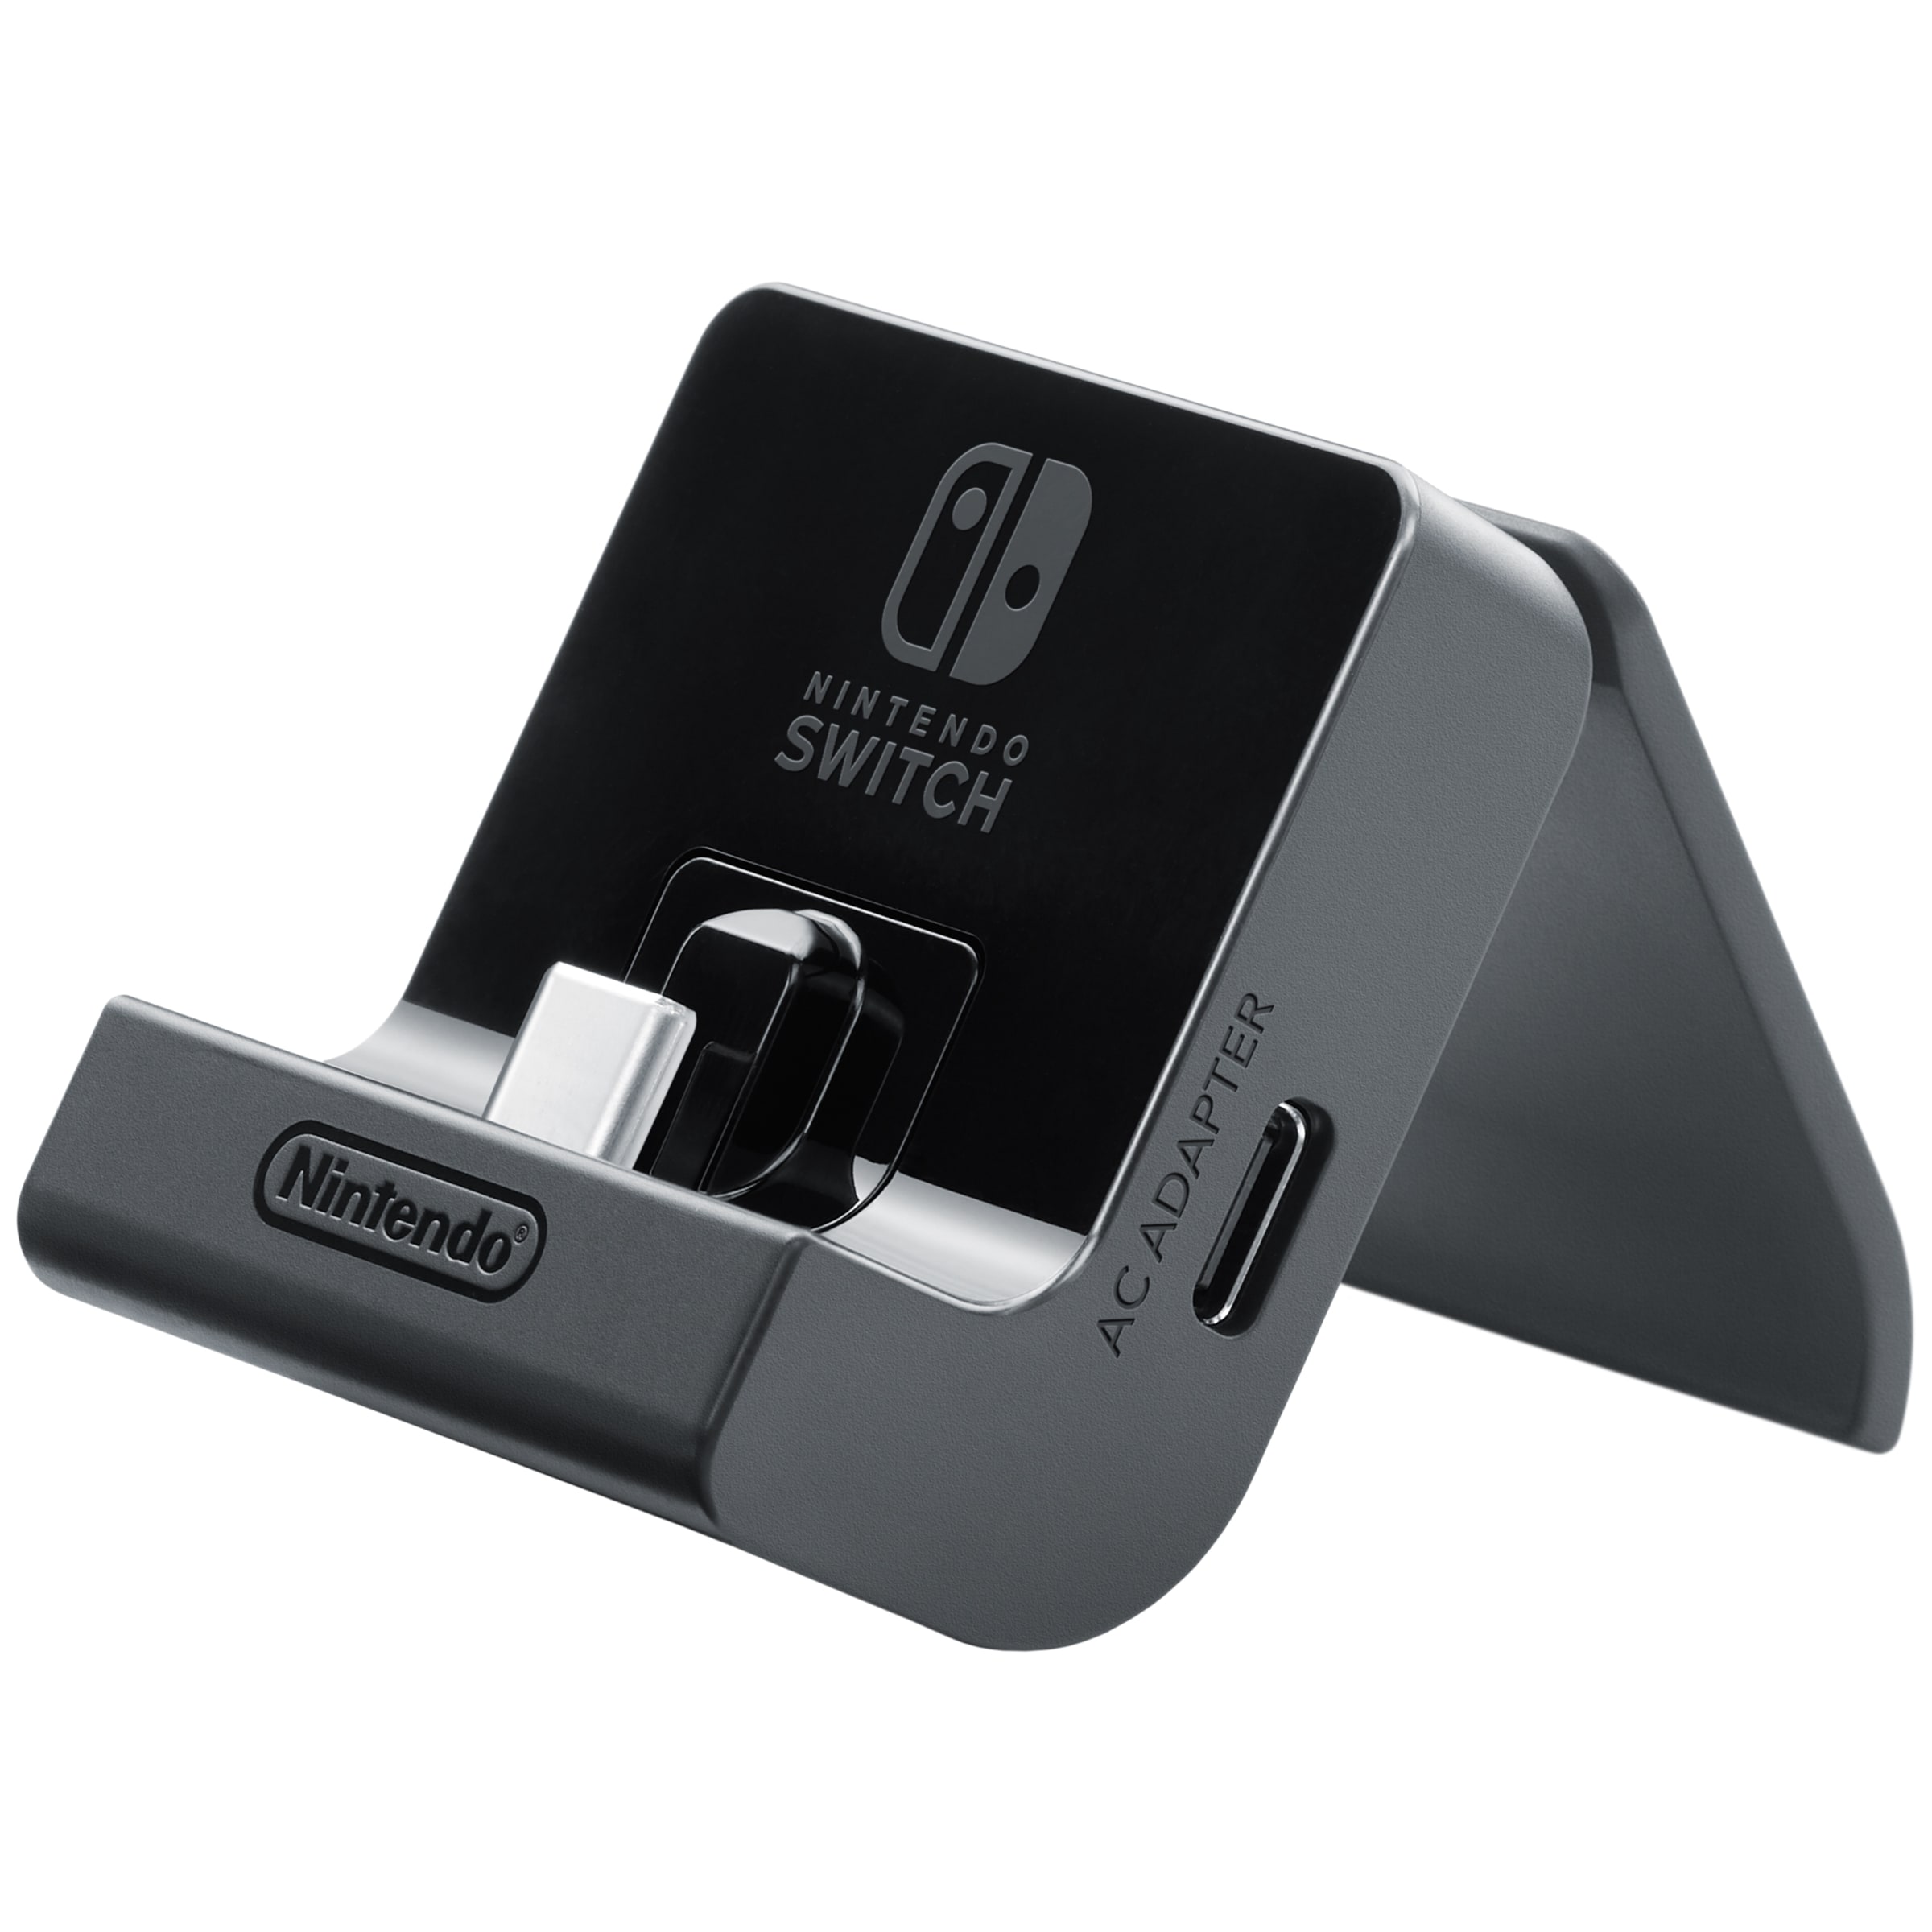 Adjustable Charging Stand for Nintendo Switch - Nintendo Official Site